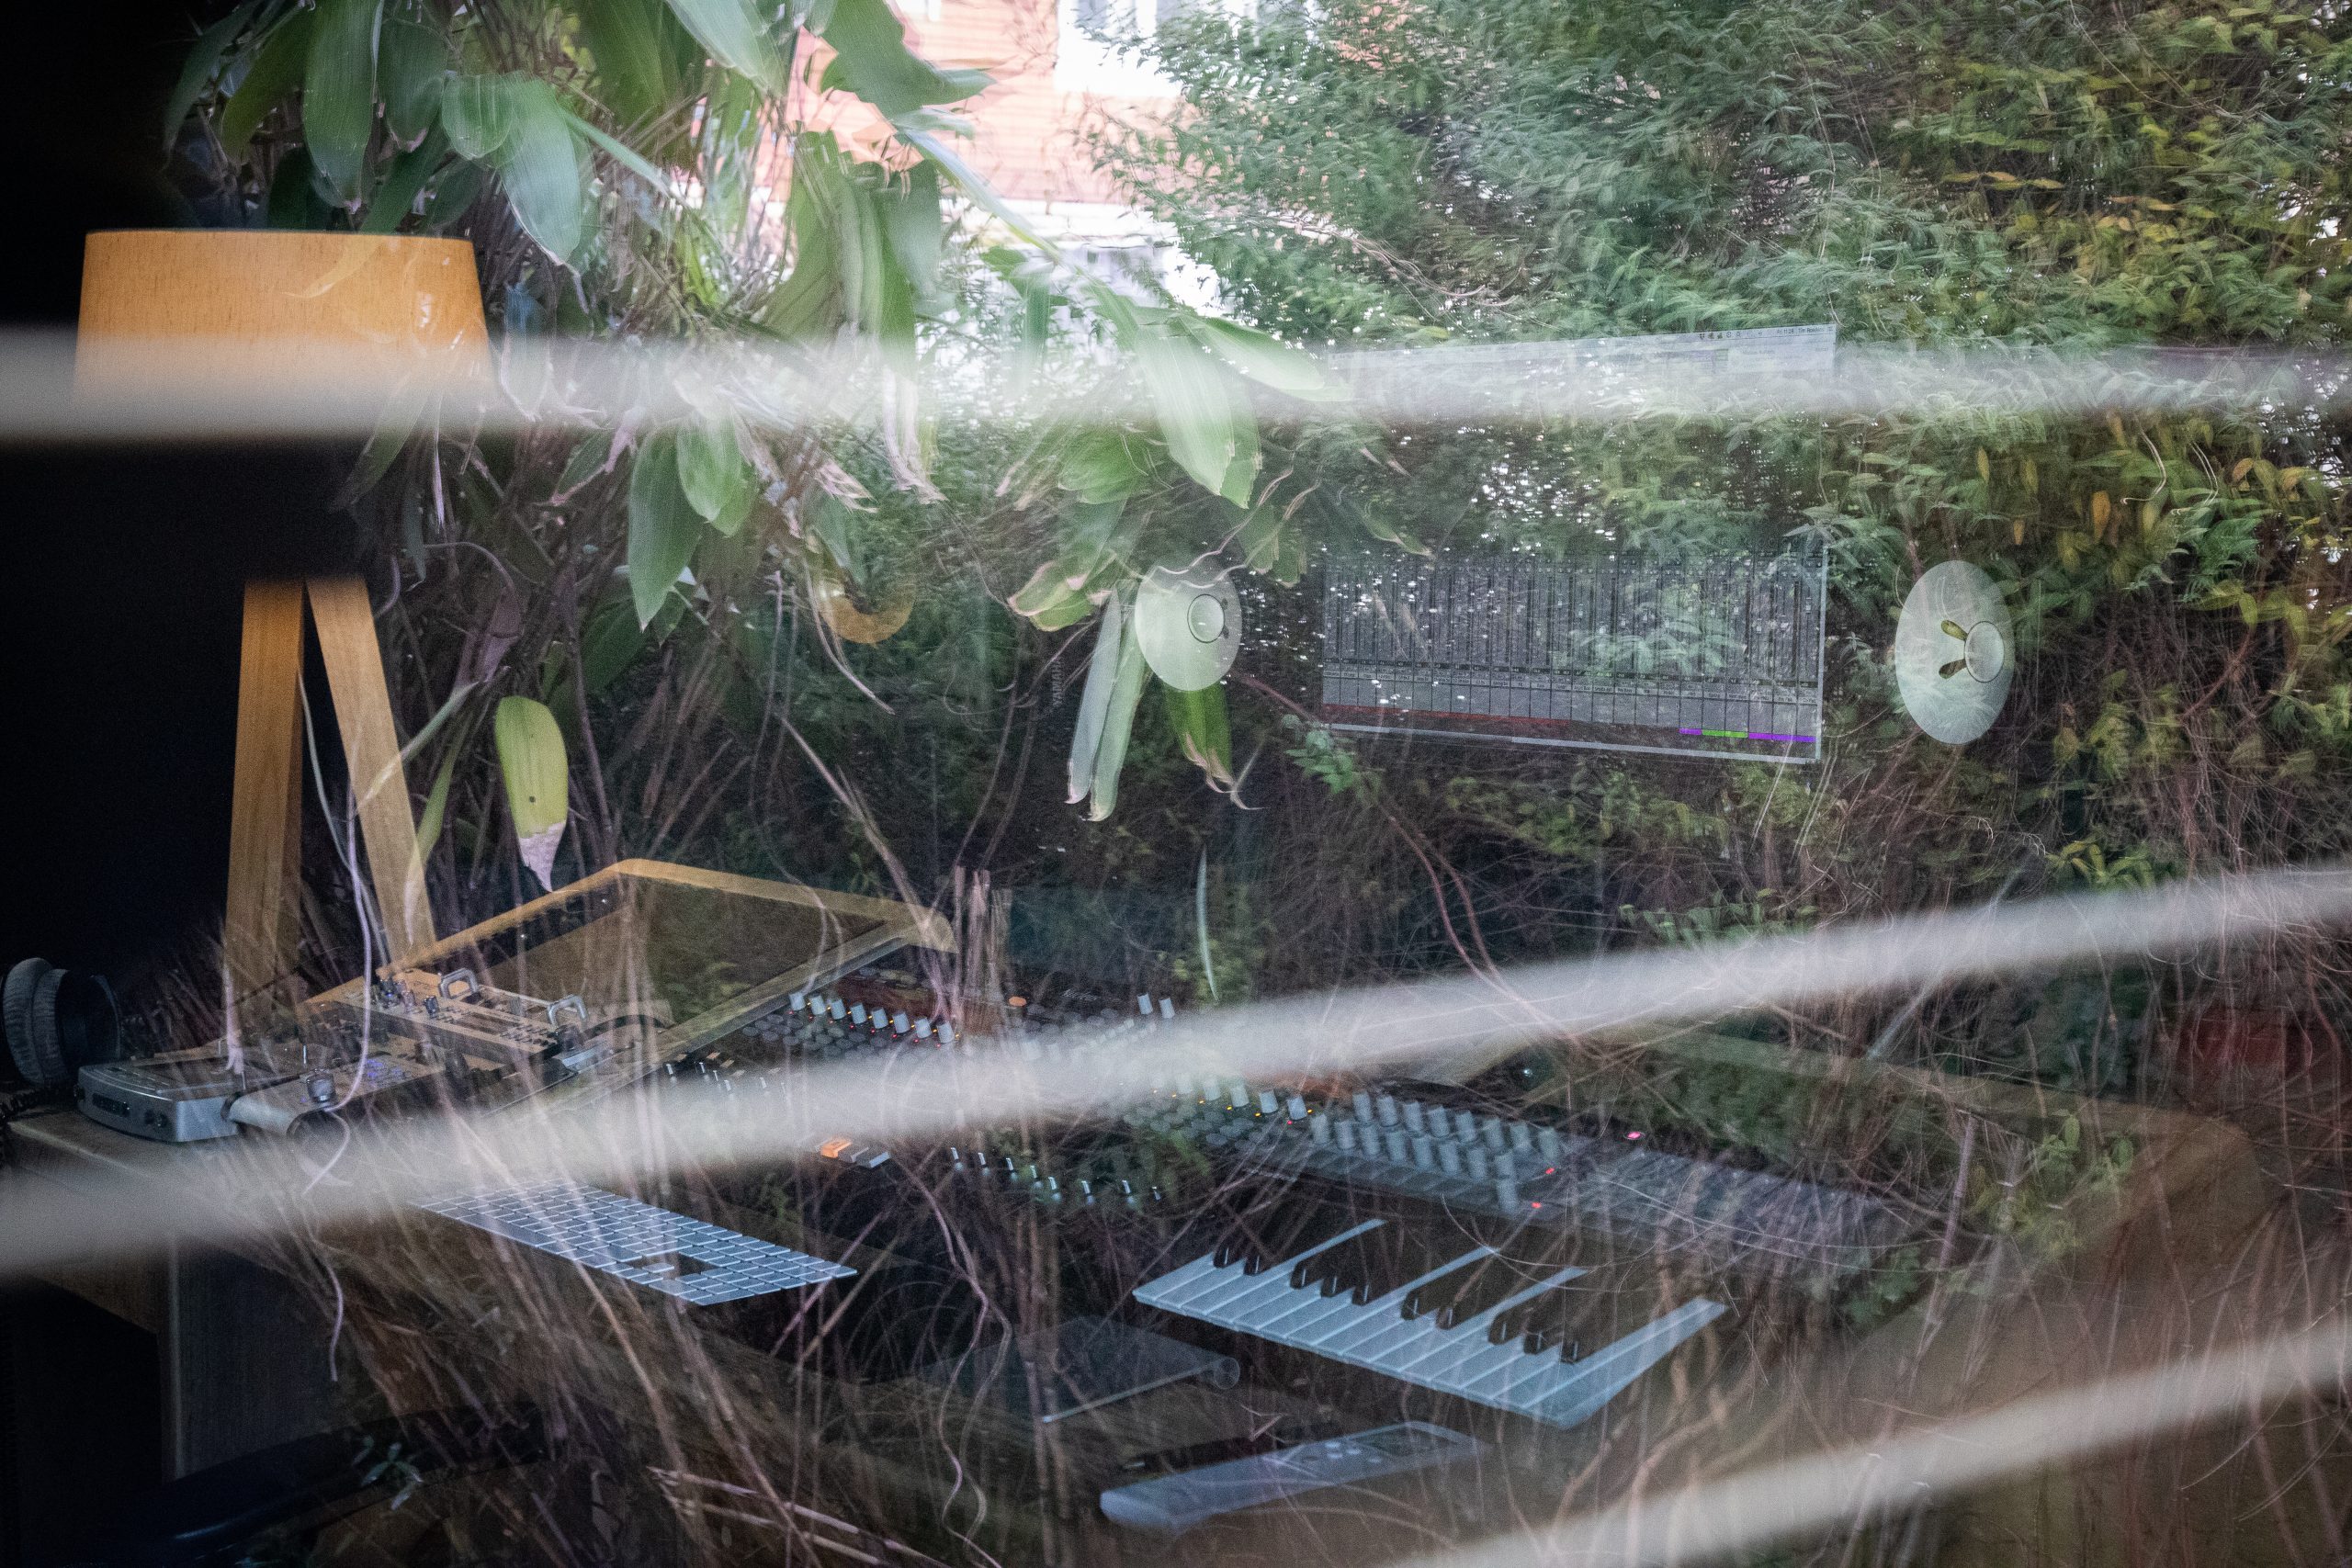 Blurred view of the backyard as seen through the open blinds of a Vivid Green home music studio window, with the reflection of the music equipment from inside visible on the glass pane.